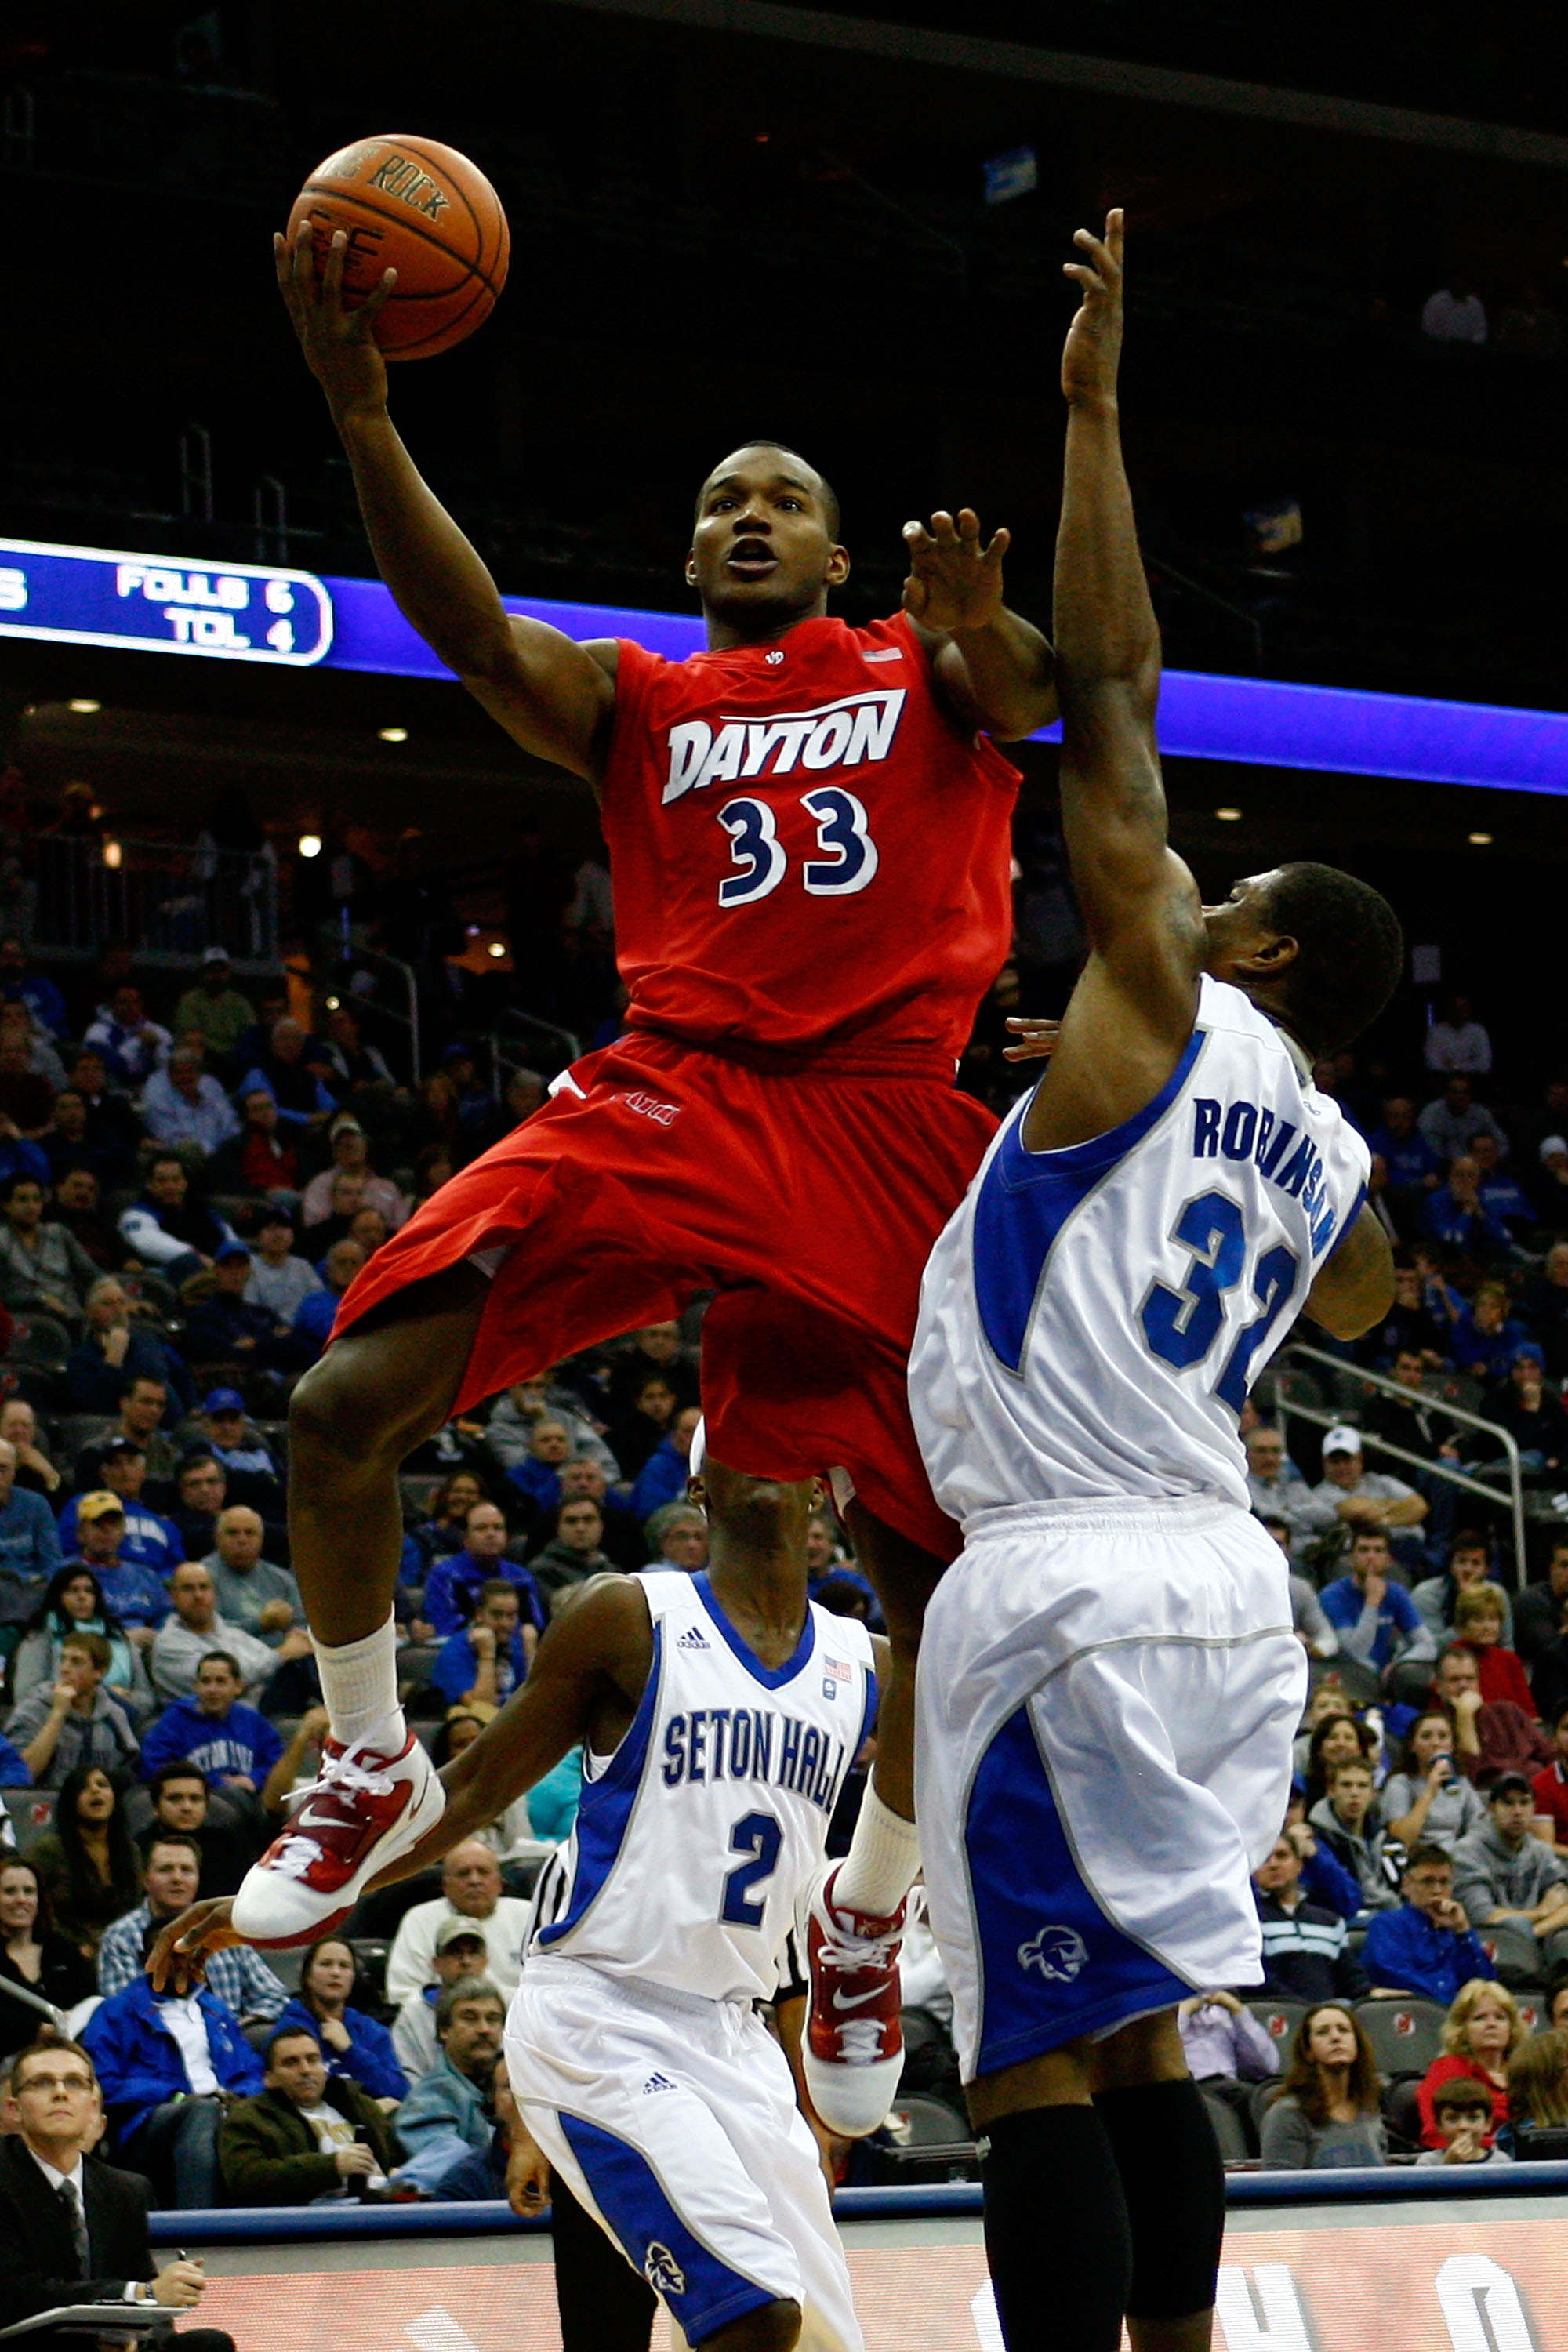 NEWARK, NJ - DECEMBER 22:  Chris Wright #33 of the Dayton Flyers drives for a shot attempt against Jeff Robinson #32 of the Seton Hall Pirates at Prudential Center on December 22, 2010 in Newark, New Jersey.  (Photo by Chris Chambers/Getty Images)